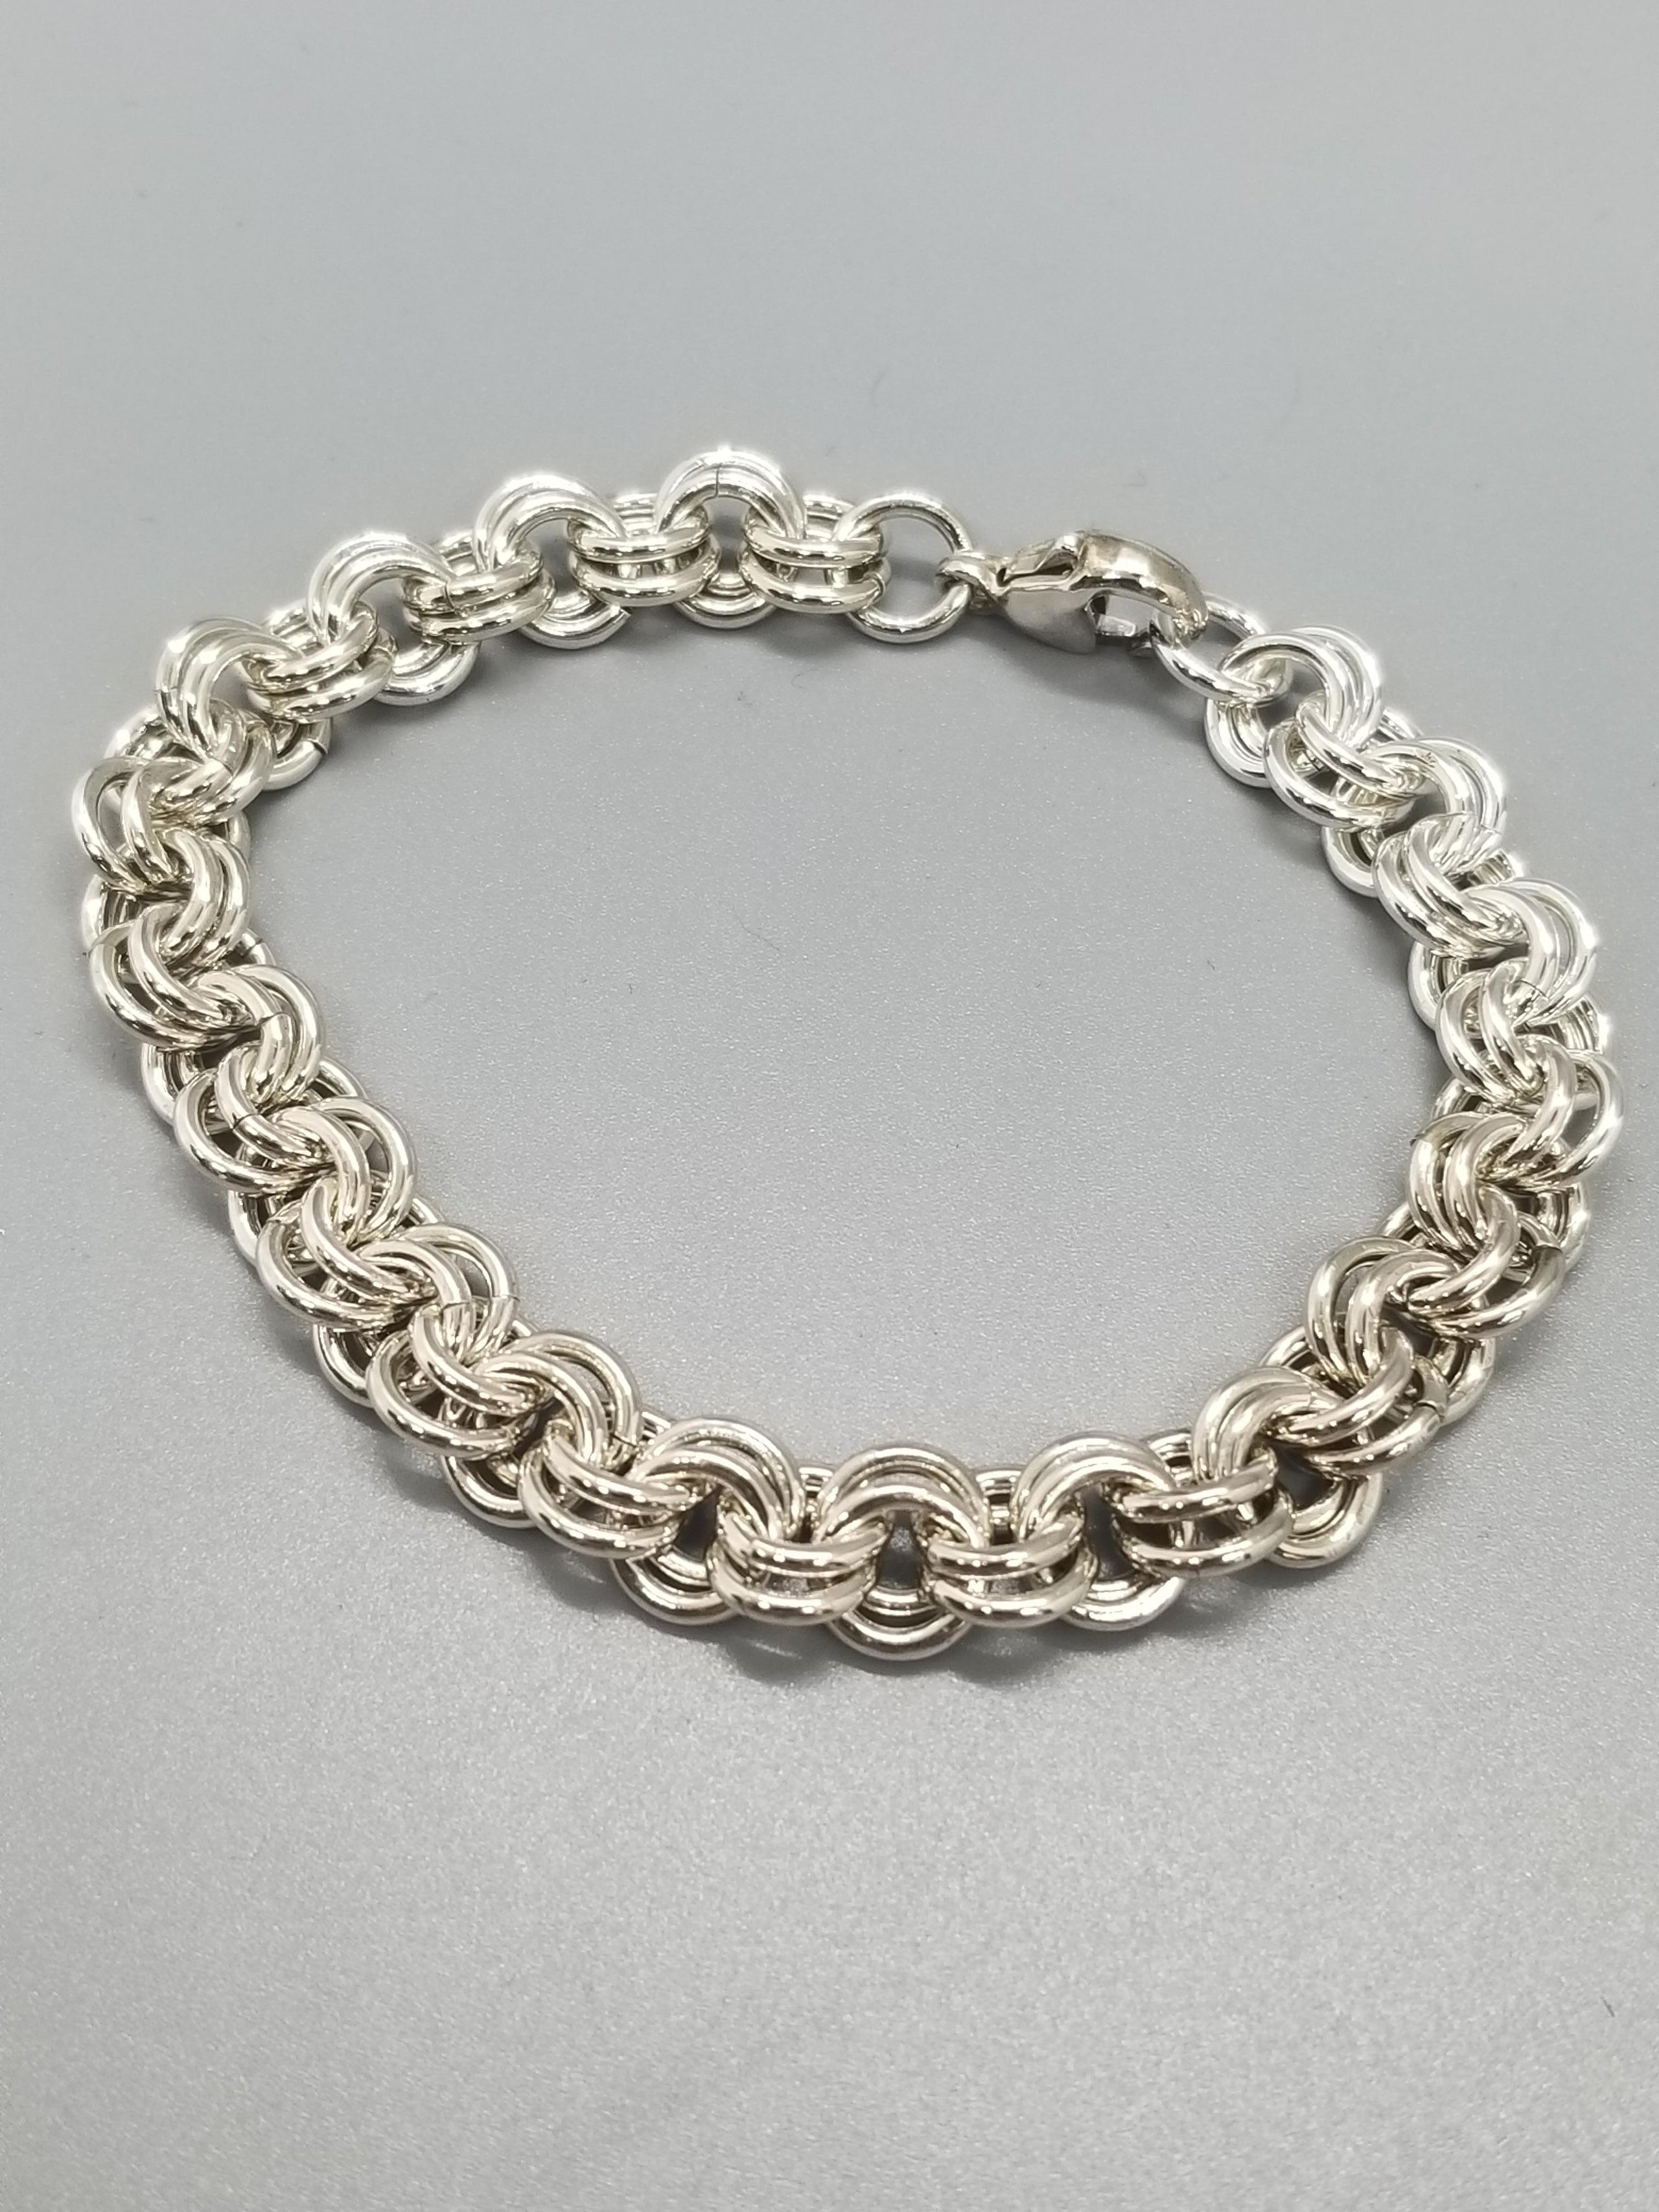 Hand coiled sterling silver chain 7 inch bracelet-SOLD